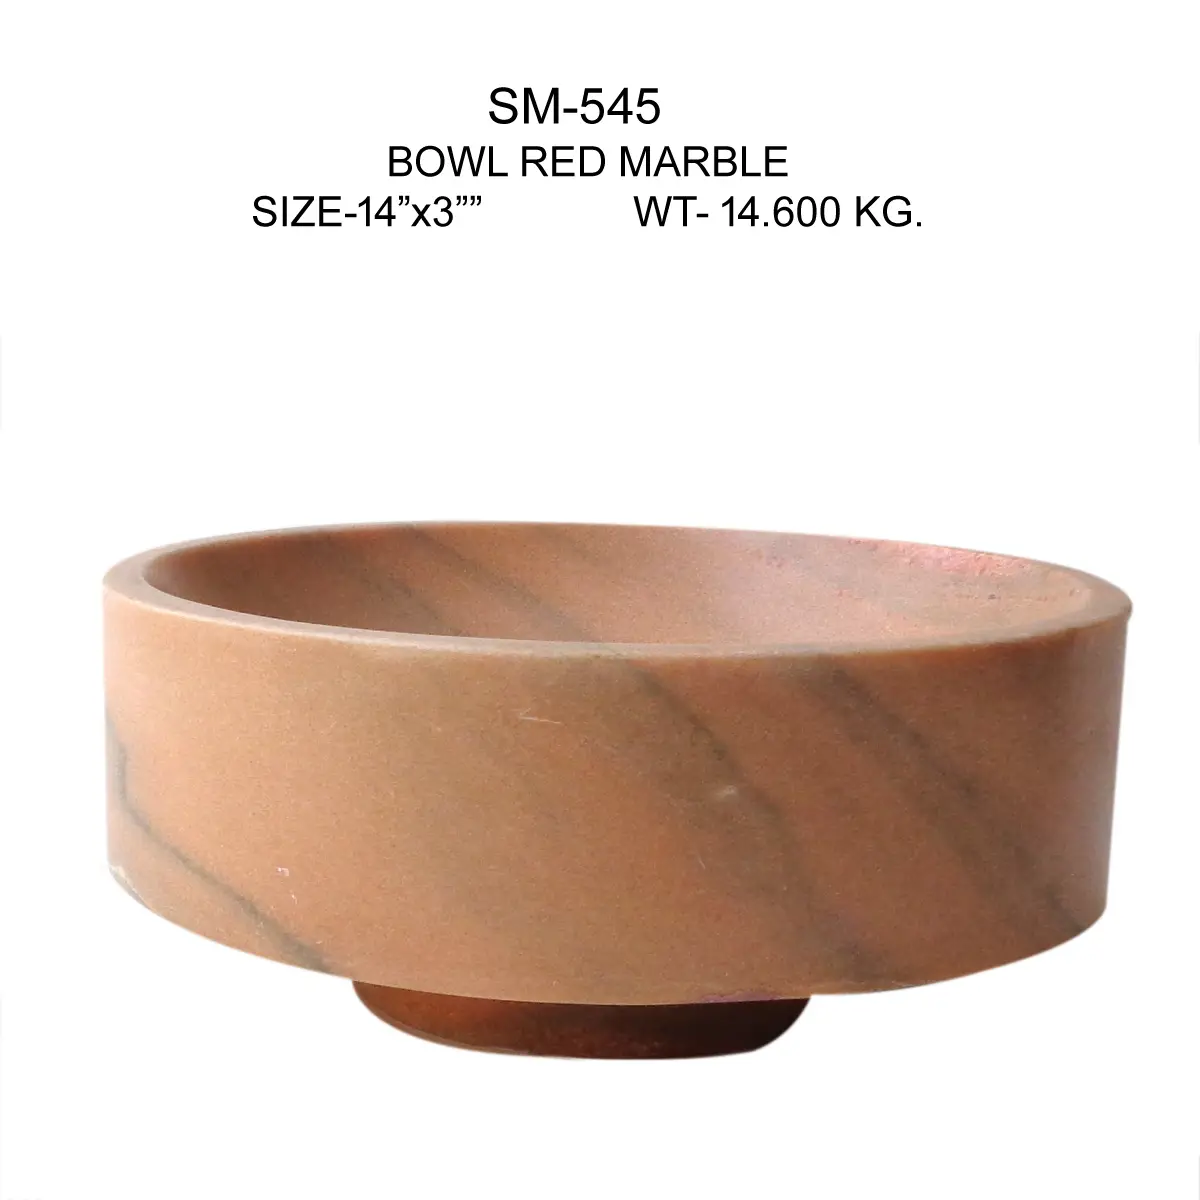 RED MARBLE BOWL STYLE-
3